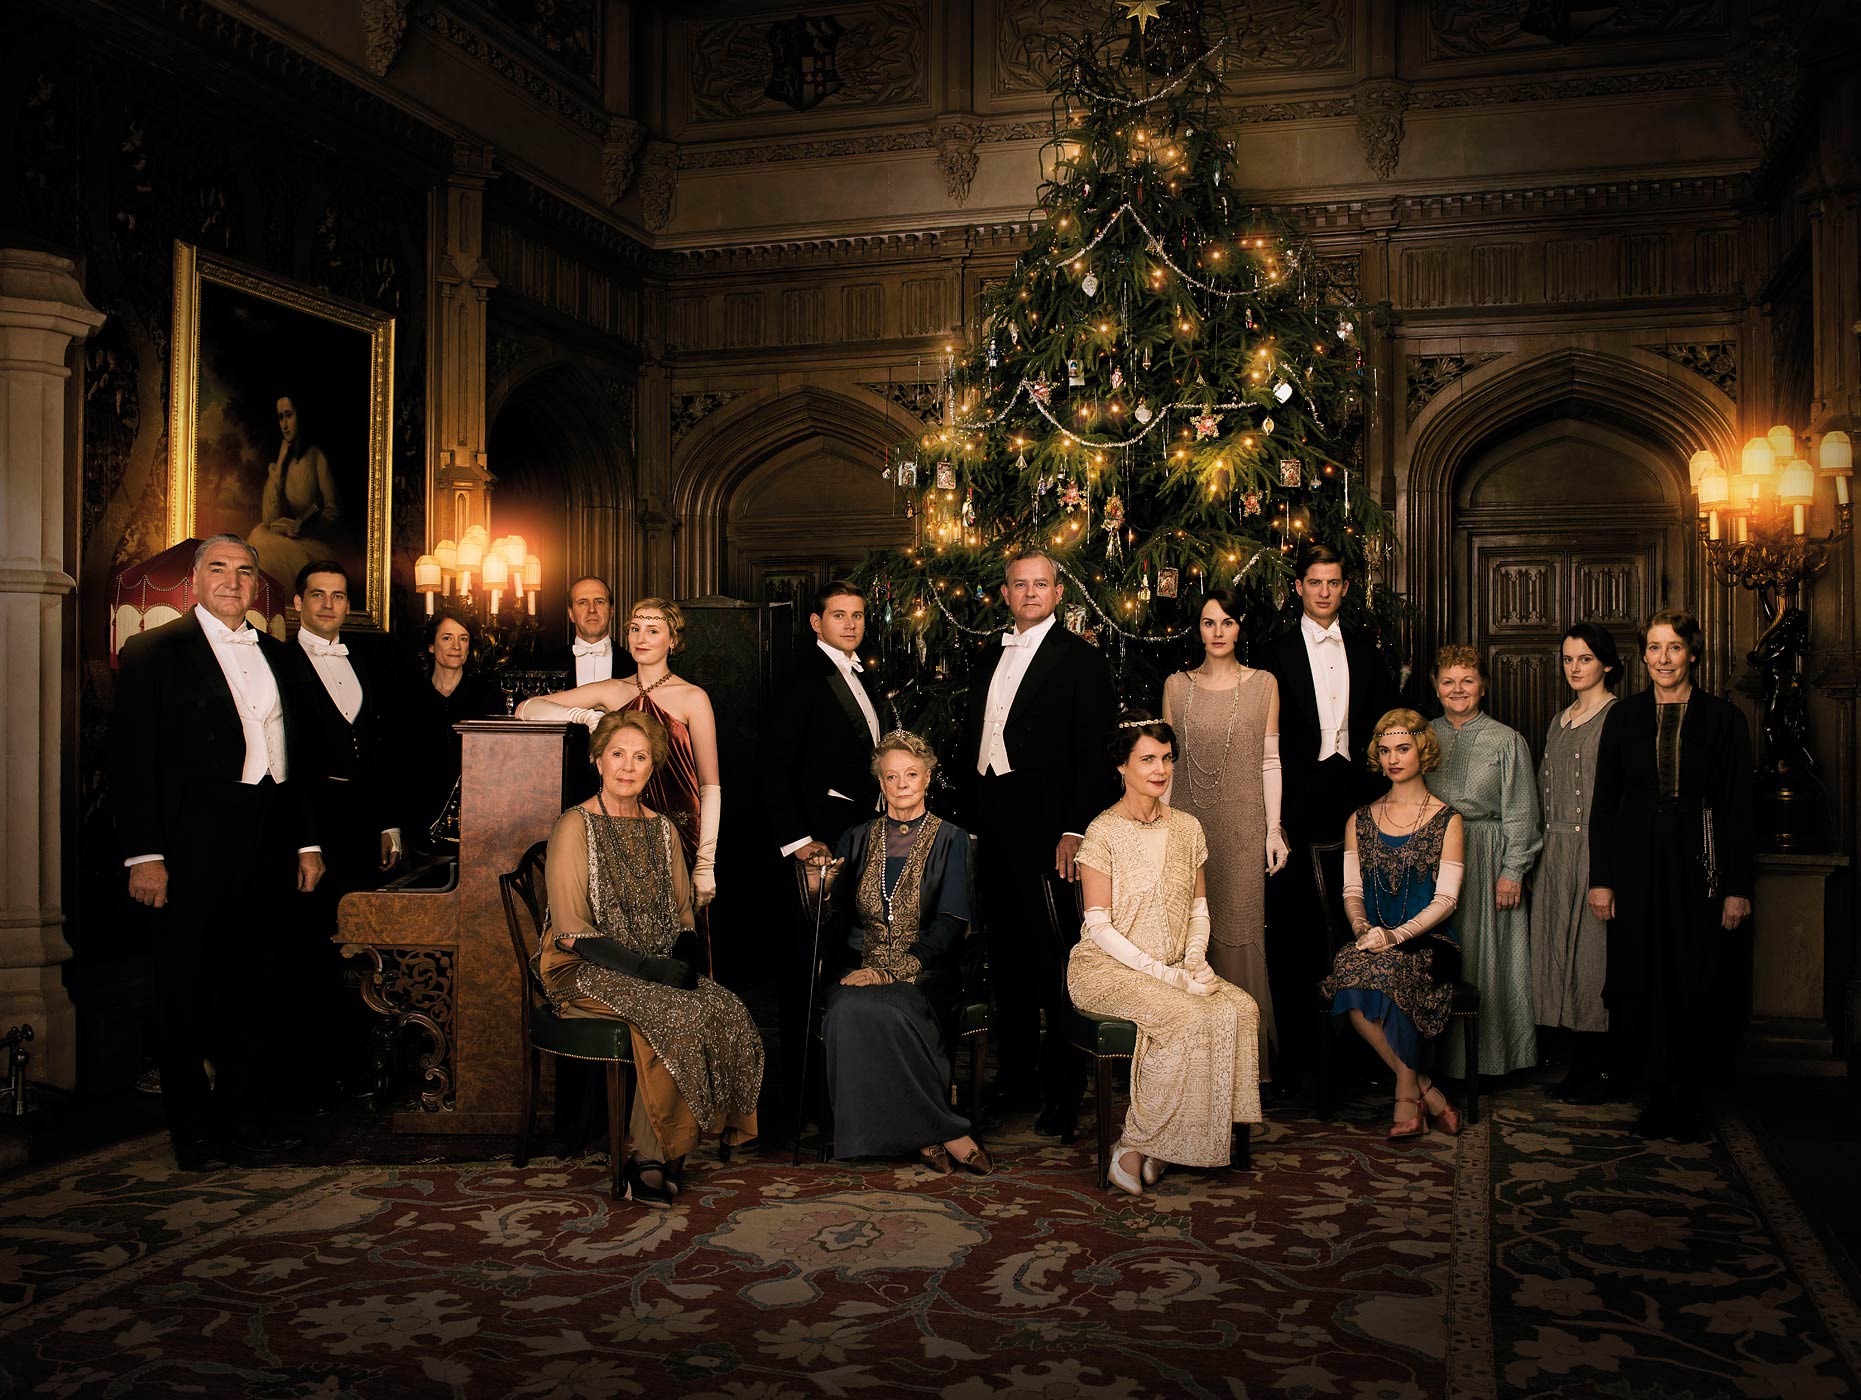 Downton Abbey, Season 5 on MASTERPIECE on PBSSundays, January 4 - March 1, 2015 at 9pm ETJIM CARTER as Mr Carson, ROBERT JAMES-COLLIER as Thomas, RAQUEL CASSIDY as Baxter, KEVIN DOYLE as Molesley, LAURA CARMICHAEL as Lady Edith Crawley, PENELOPE WILTON as Isobel Crawley, ALLEN LEECH as Tom Branson, MAGGIE SMITH as Violet, Dowager Countess of Grantham, HUGH BONNEVILLE as Robert, Earl of Grantham, ELIZABETH McGOVERN as Cora, Countess of Grantham, MICHELLE DOCKERY as Lady Mary Crawley, MATT BARBER as Atticus, LILY JAMES as Lady Rose, LESLEY NICOL as Mrs Patmore, SOPHIE McSHERA as Daisy and PHYLLIS LOGAN as Mrs Hughes. (C) Nick Briggs/Carnival Film &amp; Television Limited 2014This image may be used only in the direct promotion of MASTERPIECE CLASSIC. No other rights are granted. All rights are reserved. Editorial use only. USE ON THIRD PARTY SITES SUCH AS FACEBOOK AND TWITTER IS NOT ALLOWED.